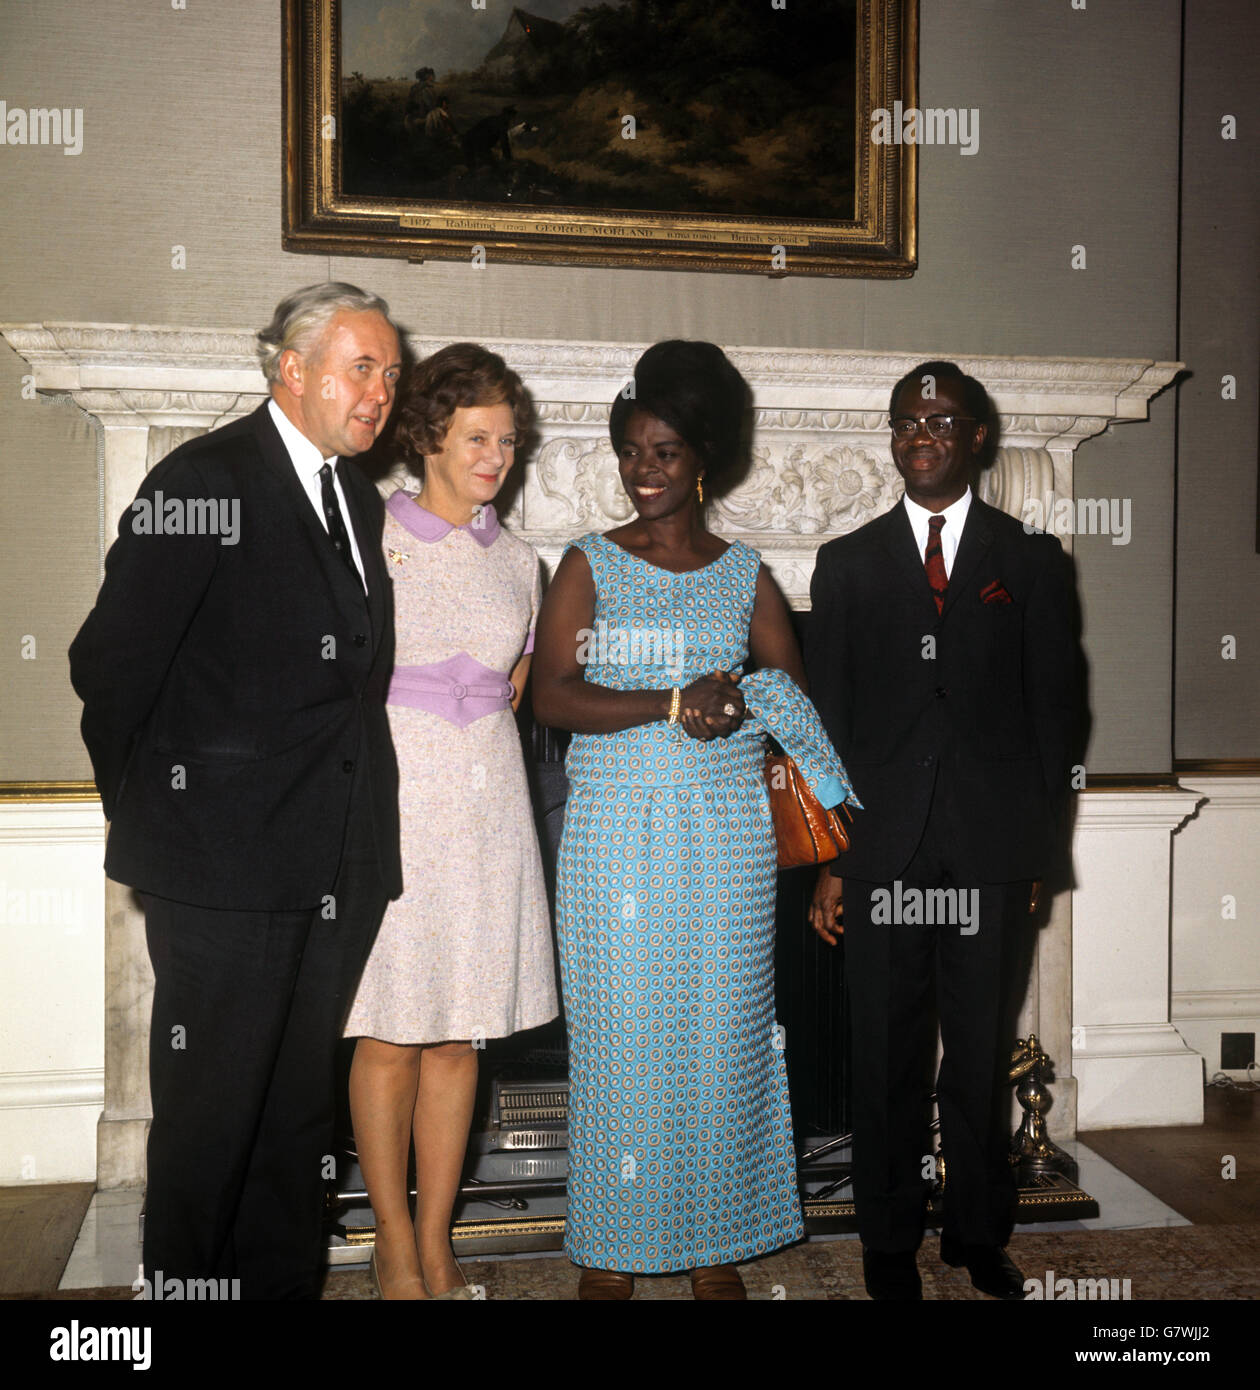 The Prime Minister Harold Wilson and his wife Mary with today's luncheon guests at No. 10 Downing Street, Ghana's new Prime Minister and wife, Dr. Kofi Busia and Mrs Busia. Stock Photo